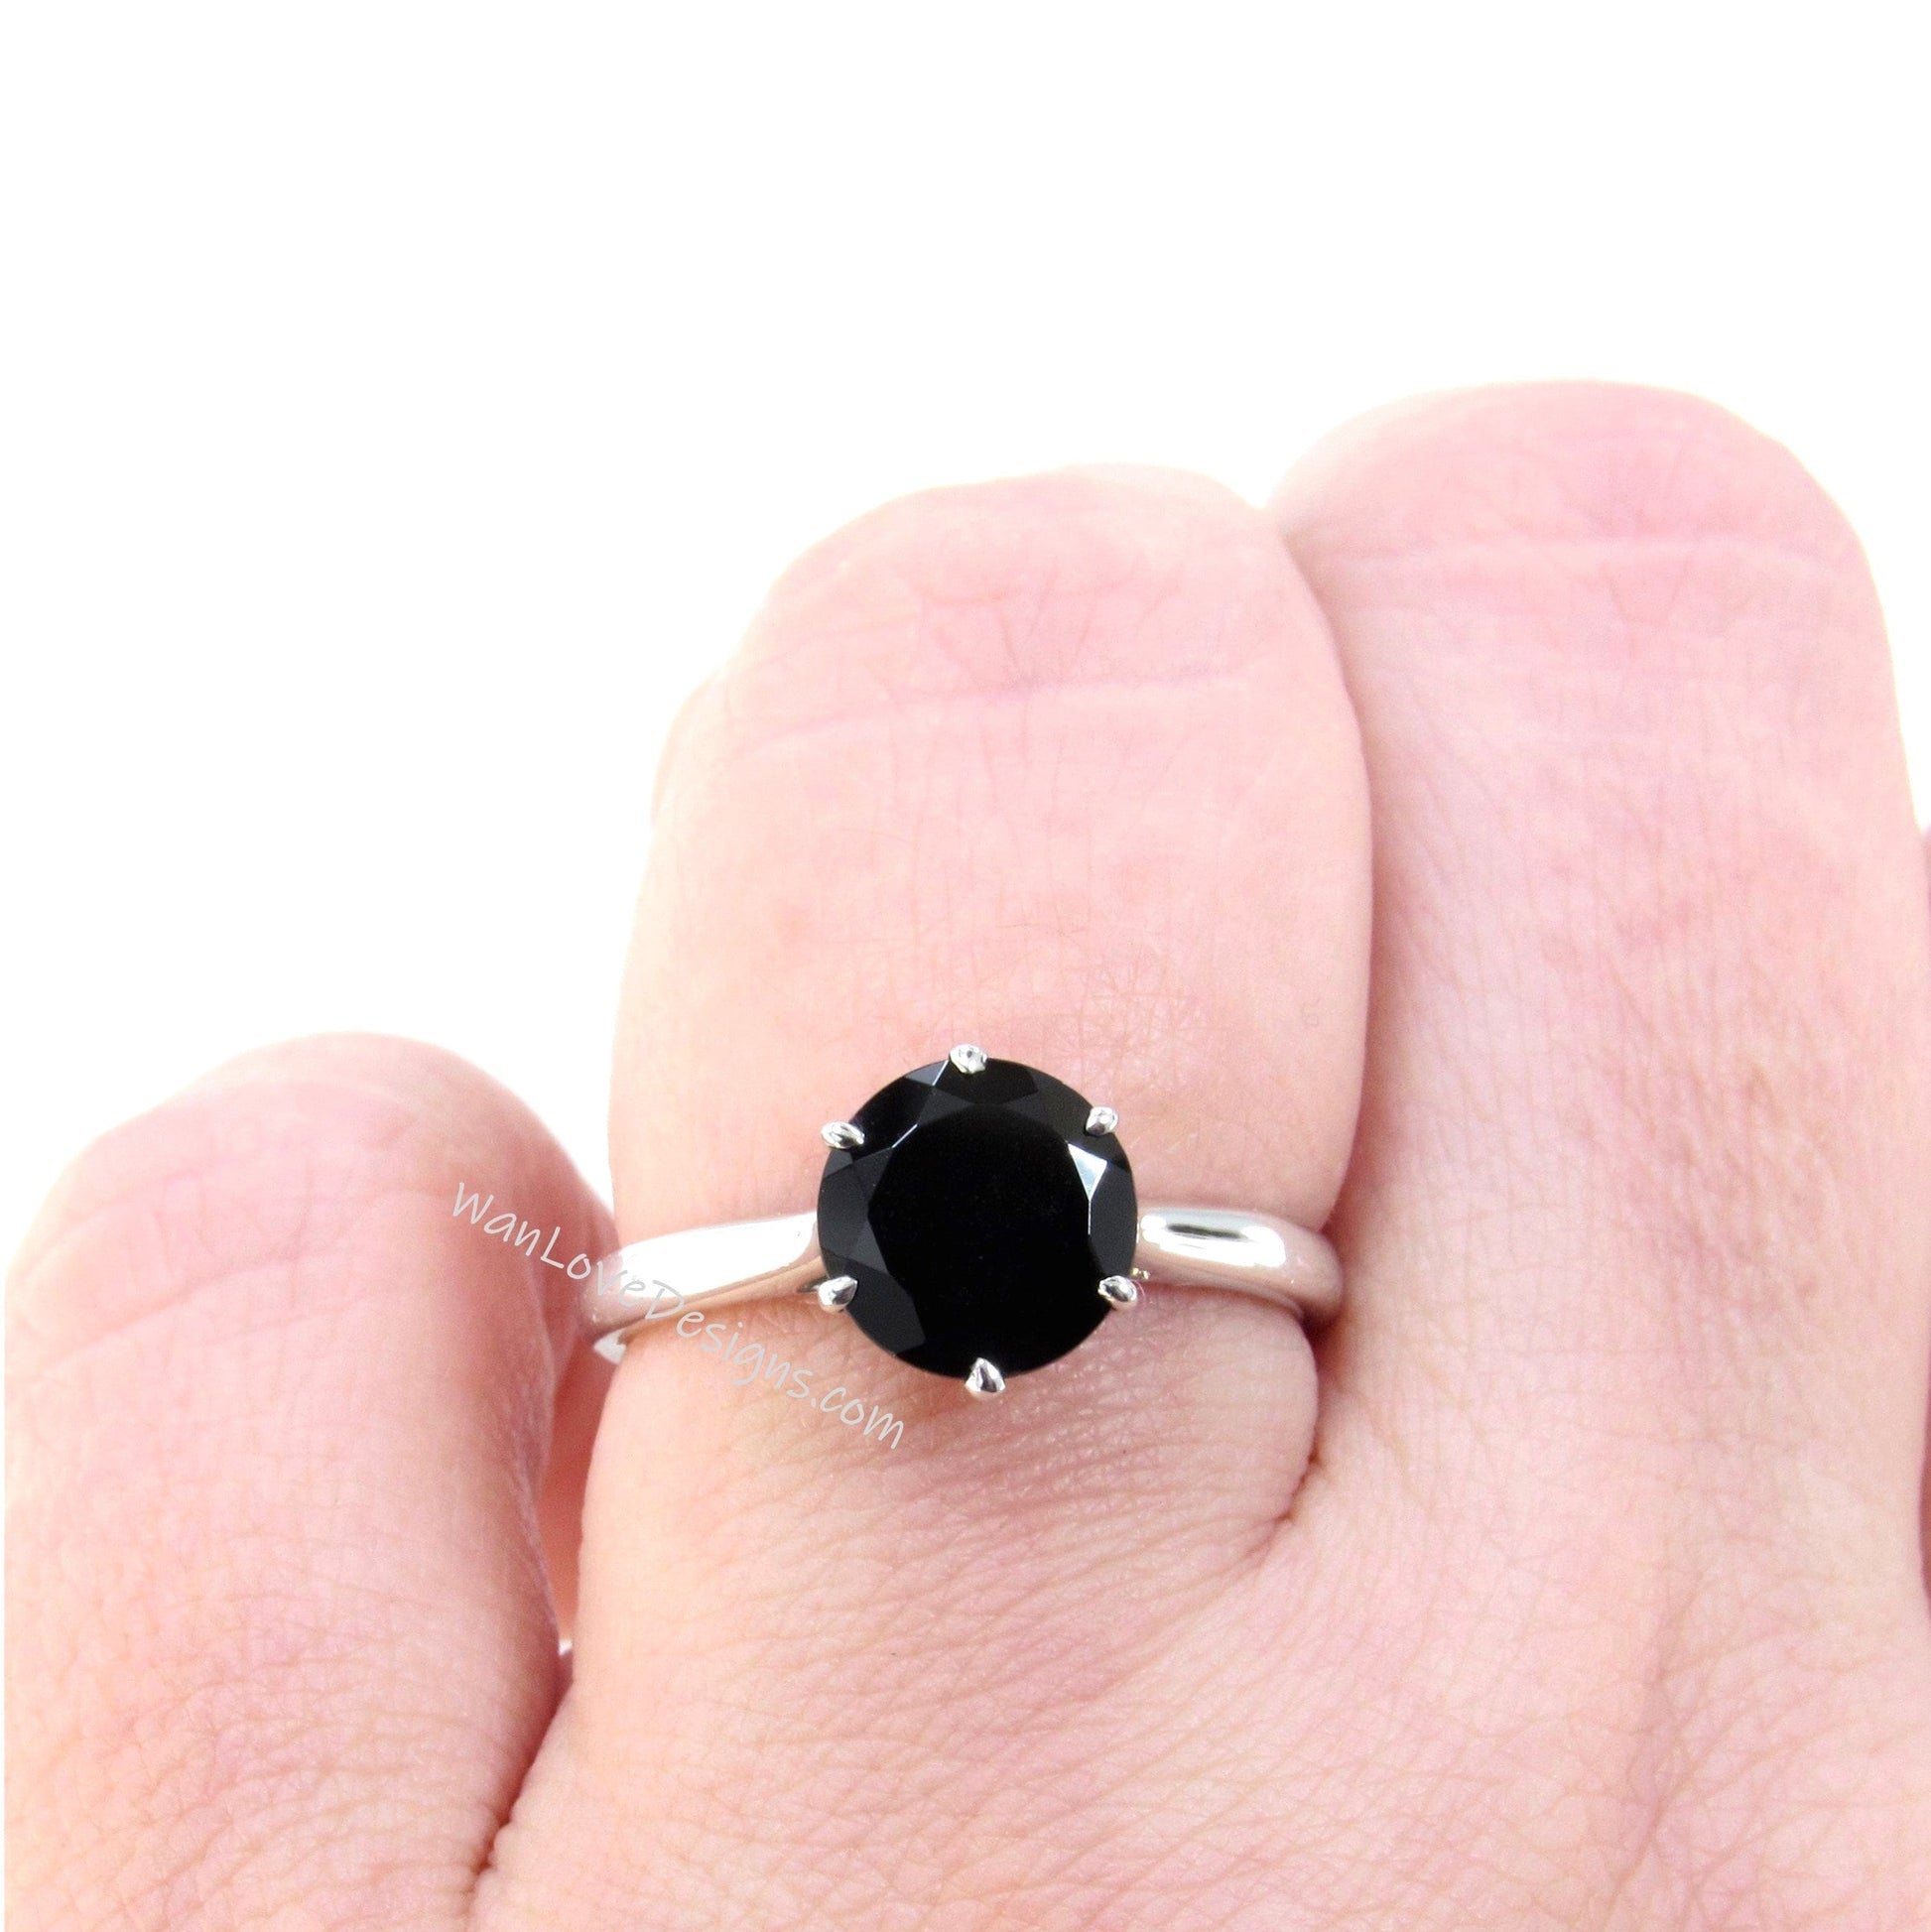 2ct Round Black Spinel ring Trellis Gallery 6 Prong Solitaire Engagement Ring art deco Anniversary bridal unique wedding band Gift for her Wan Love Designs